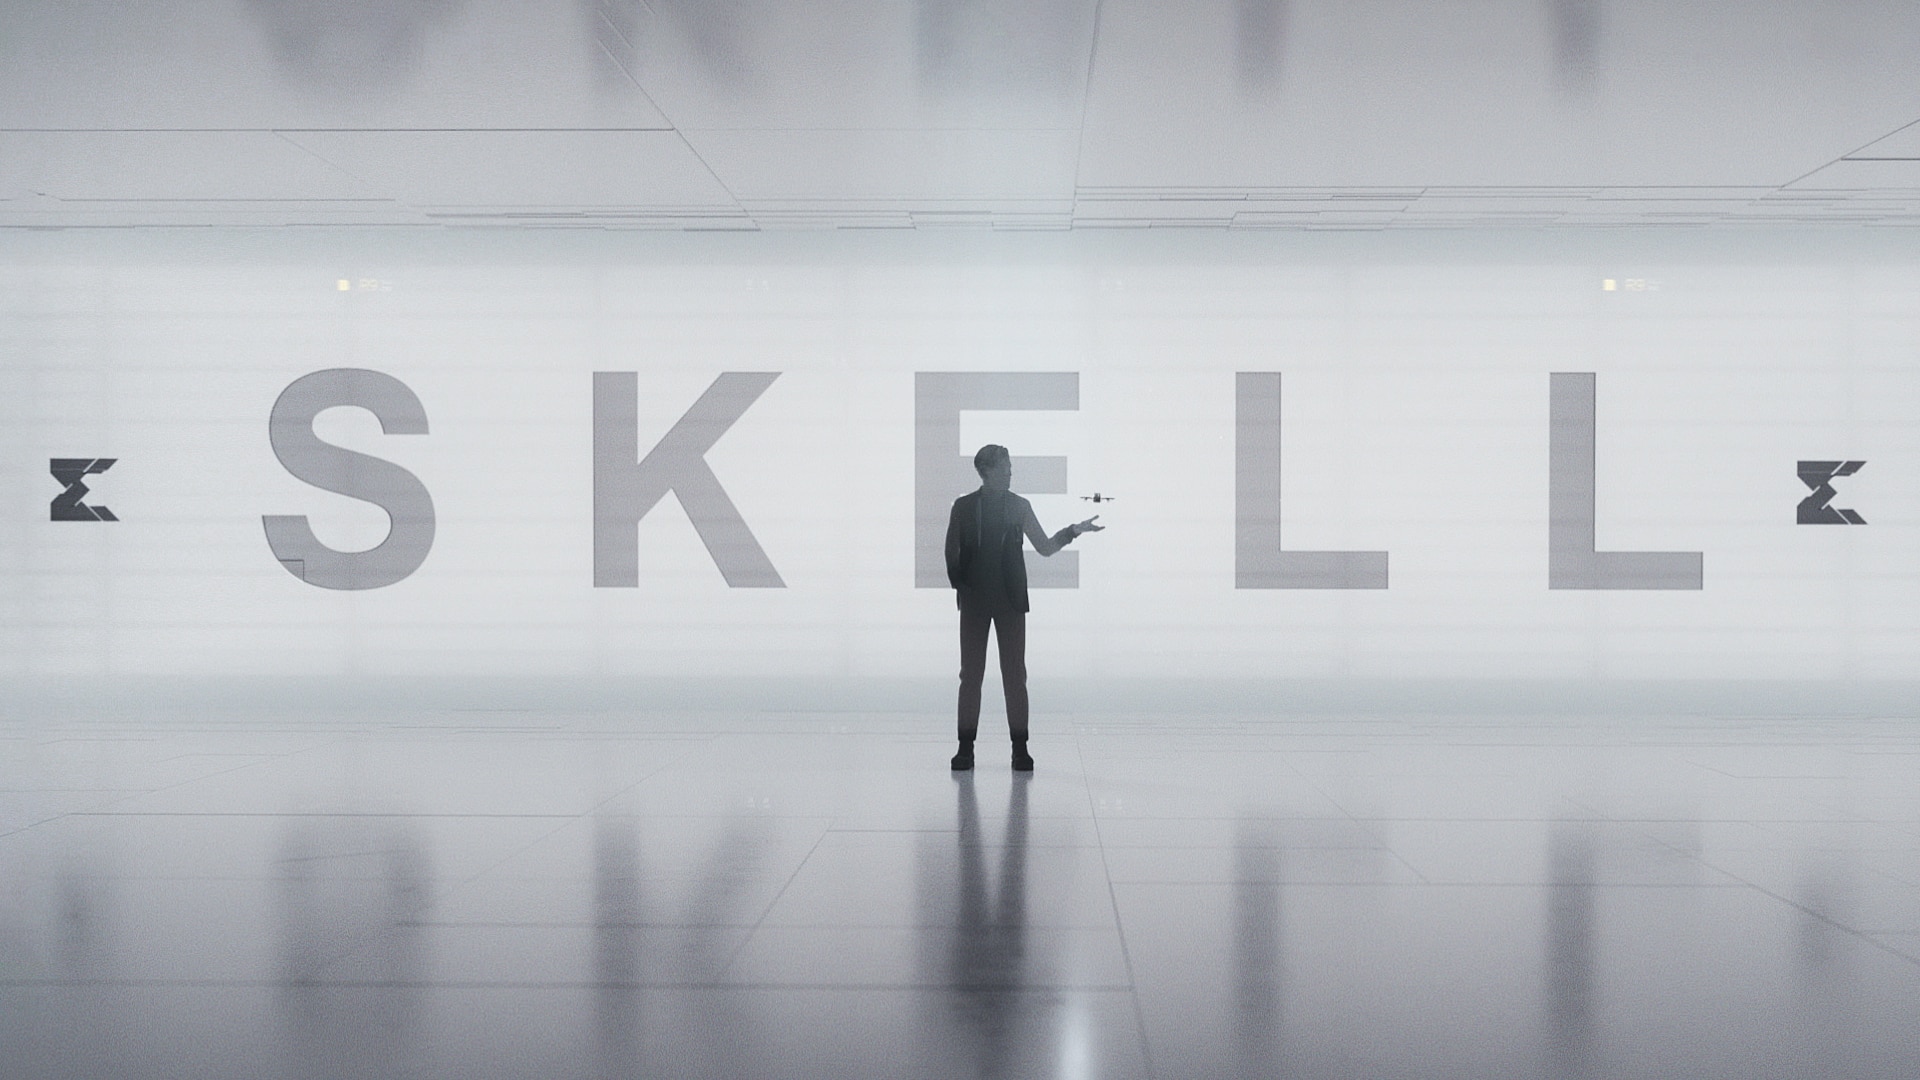 SKELL01